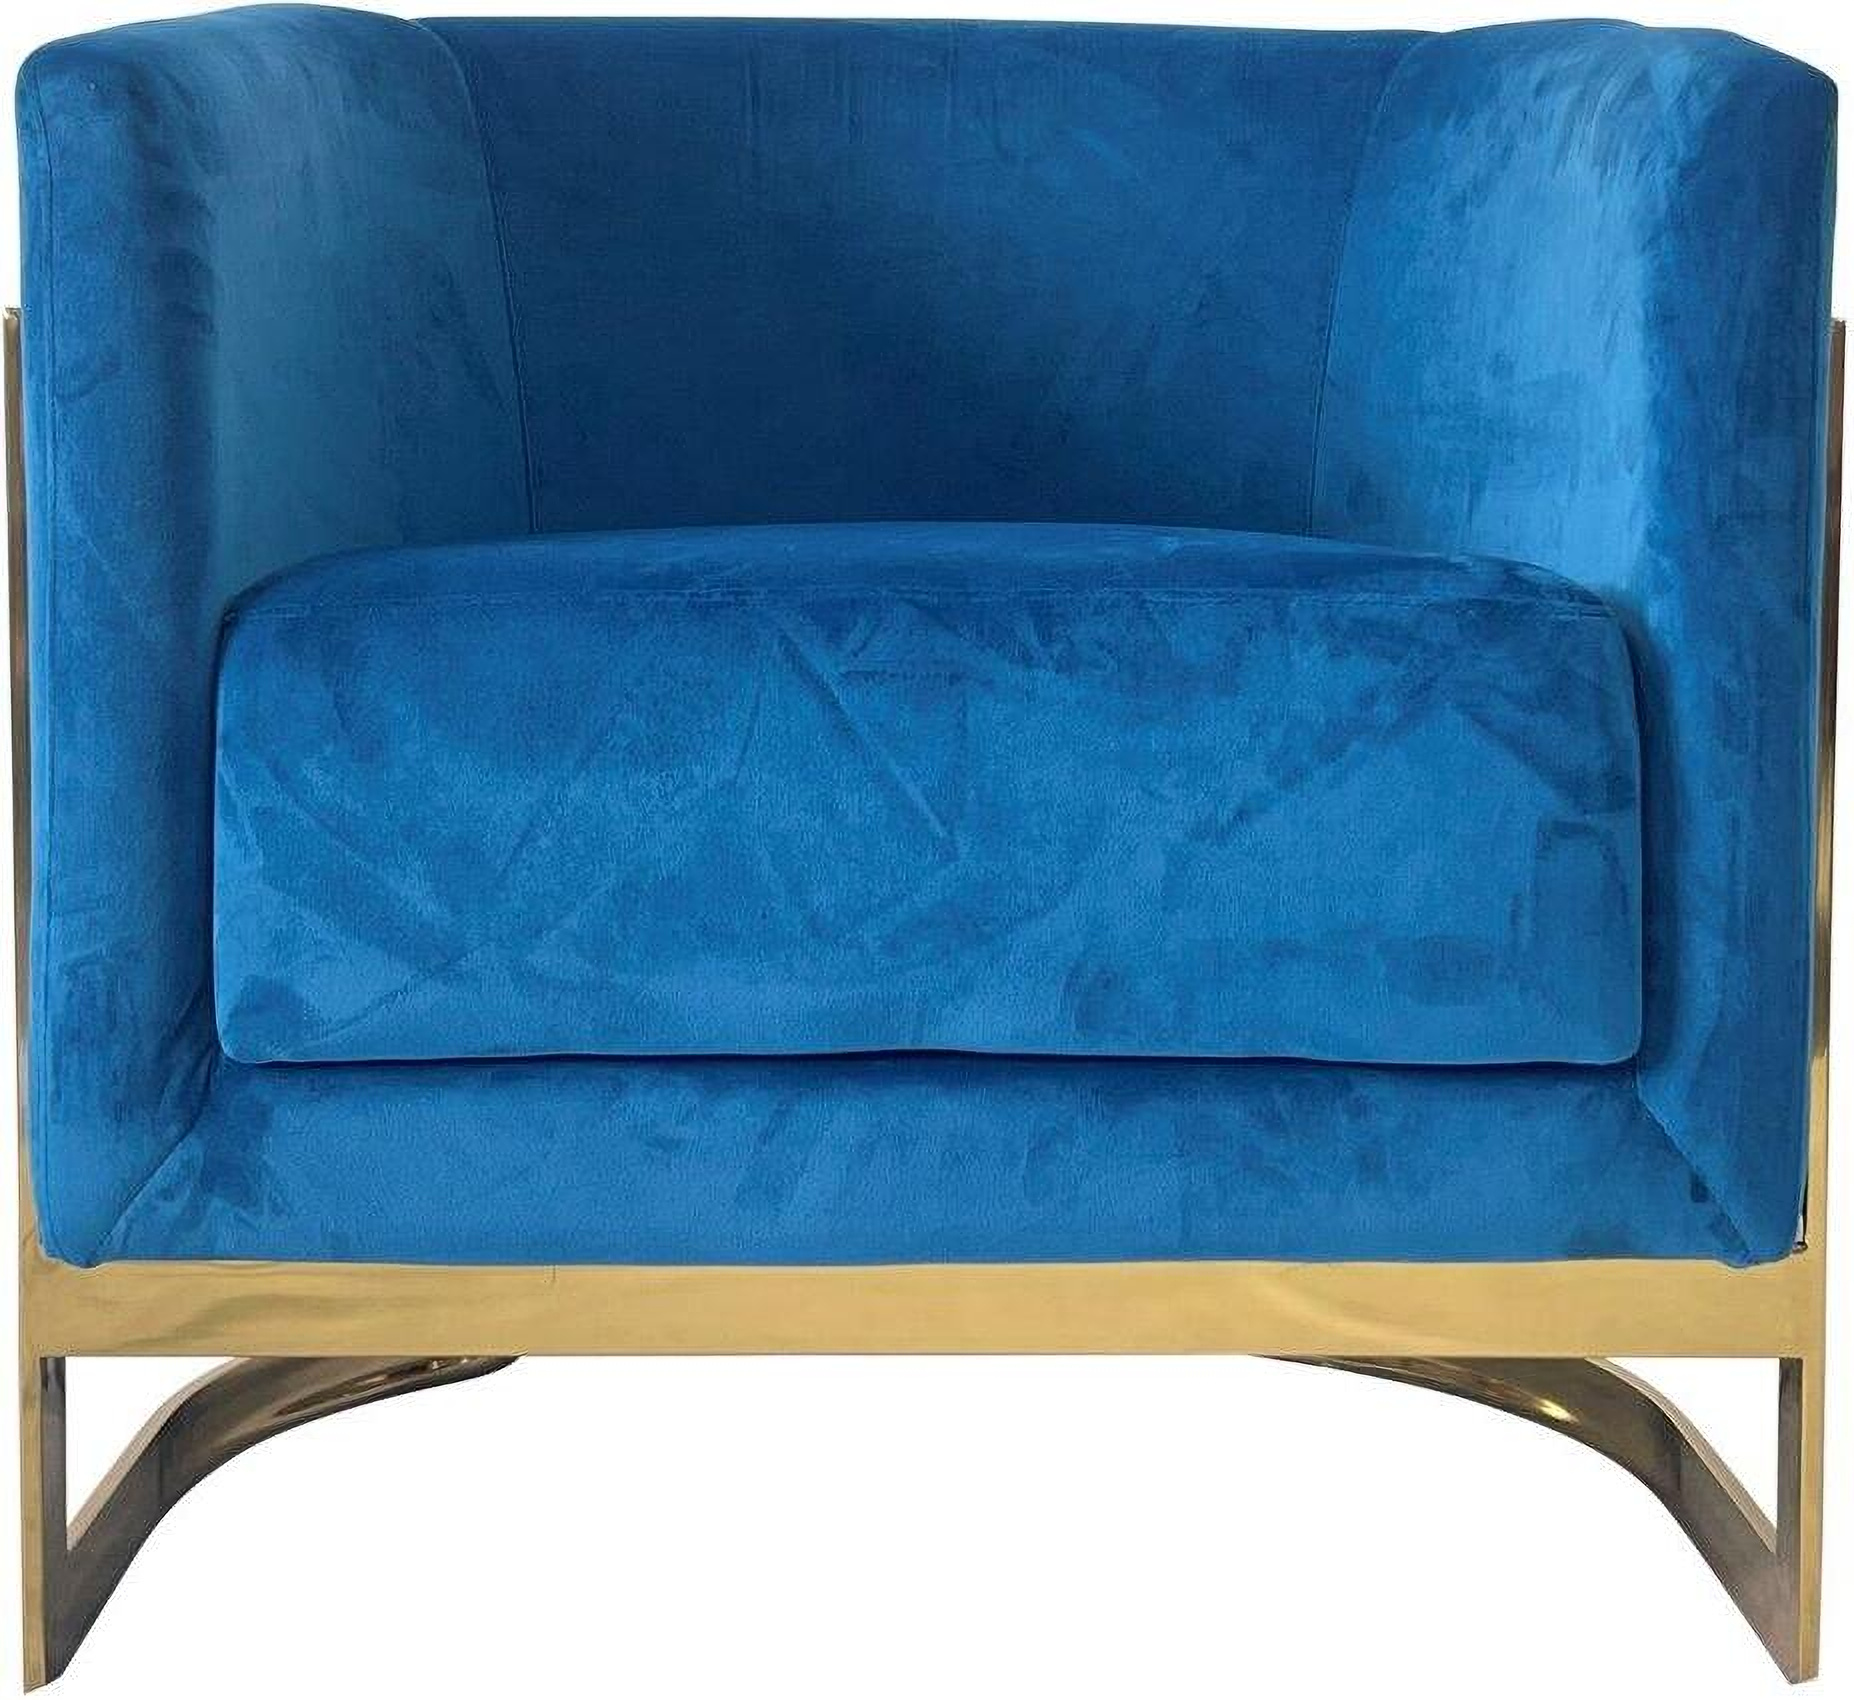 Timeless Blue and Gold Sofa Chair by Amazing Rugs